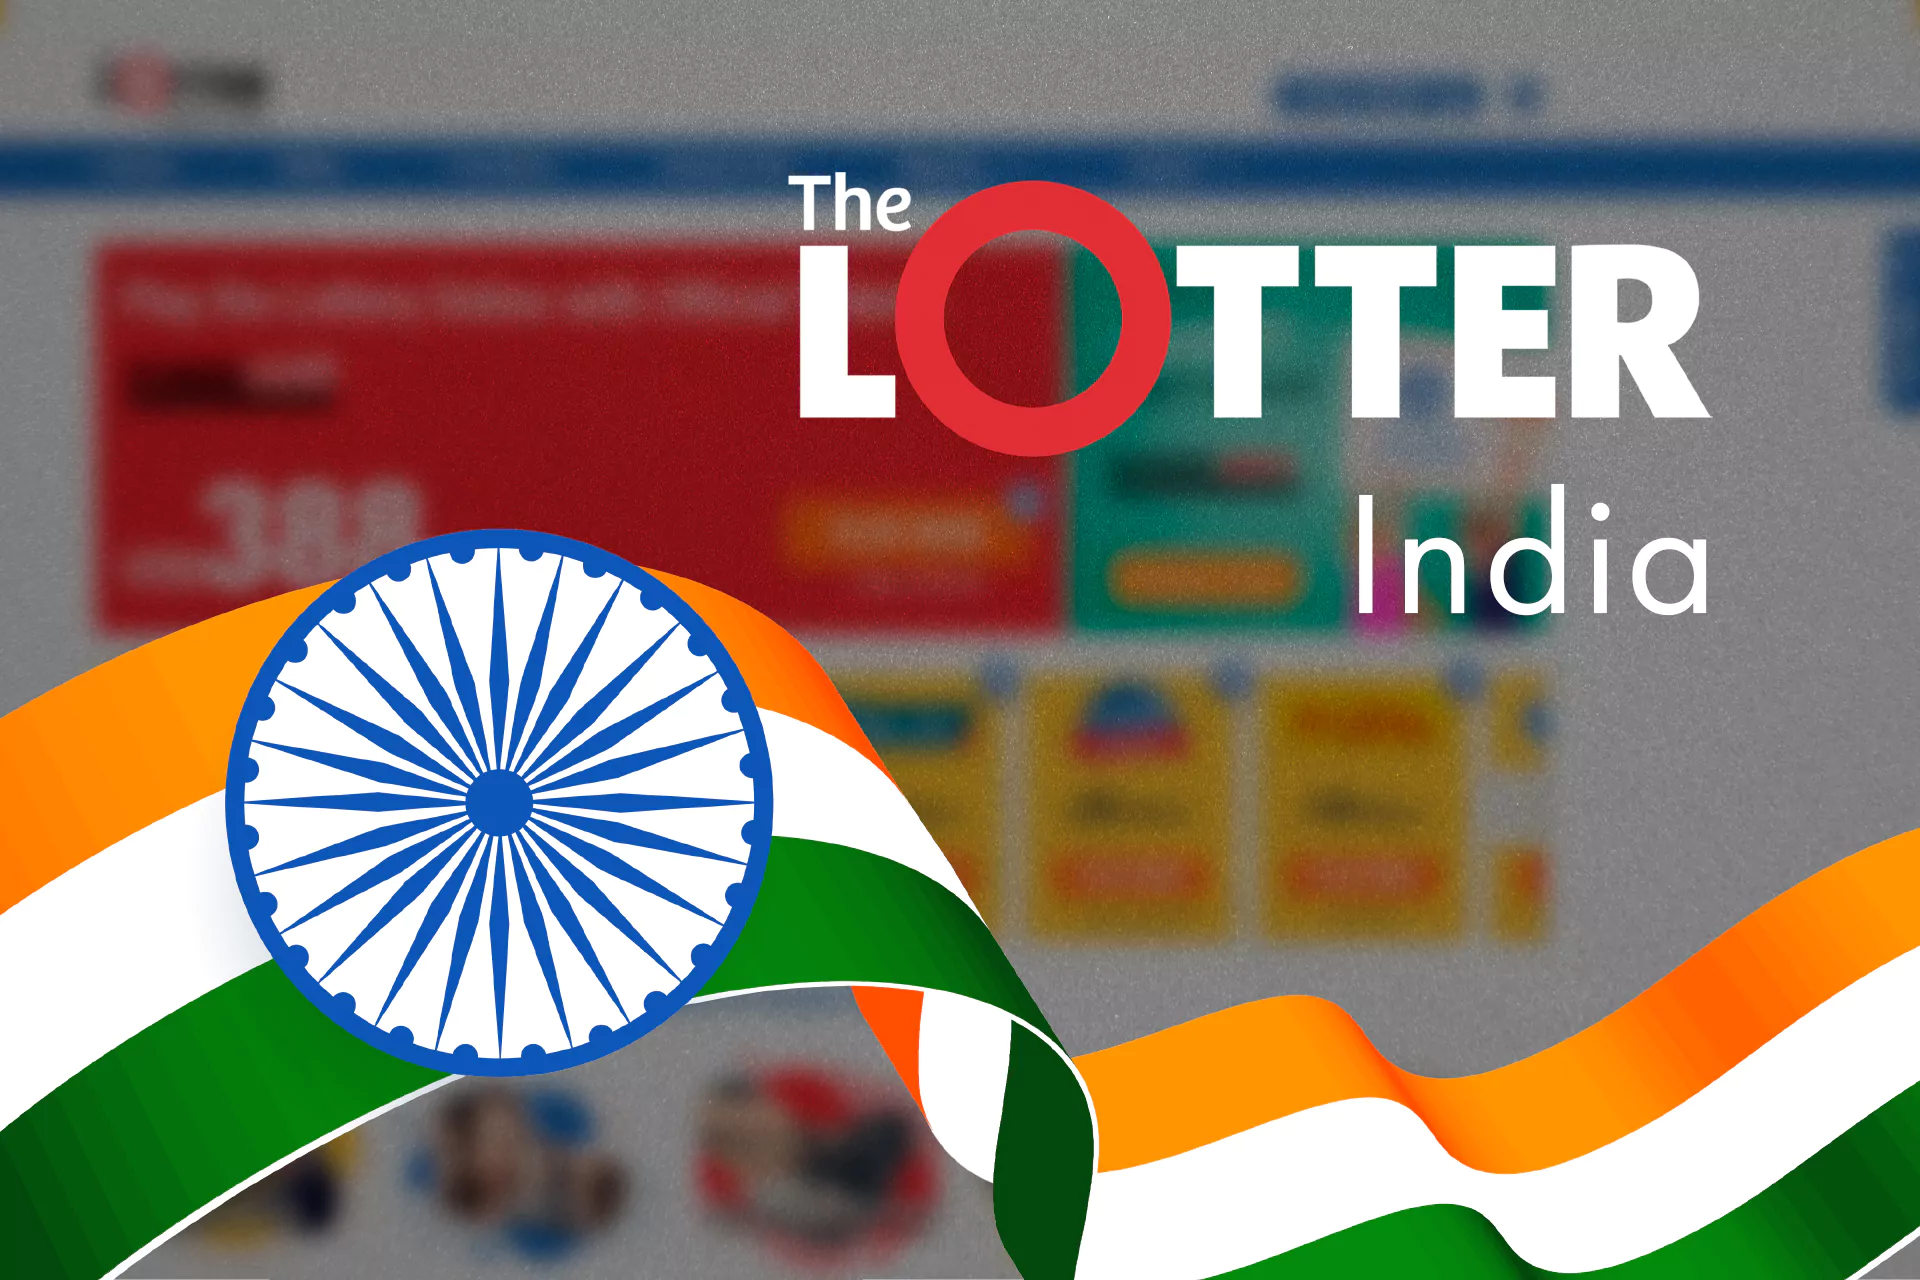 Despite the most lotteries are European and American users from India can buy tickets to any of them using their account on TheLotter.